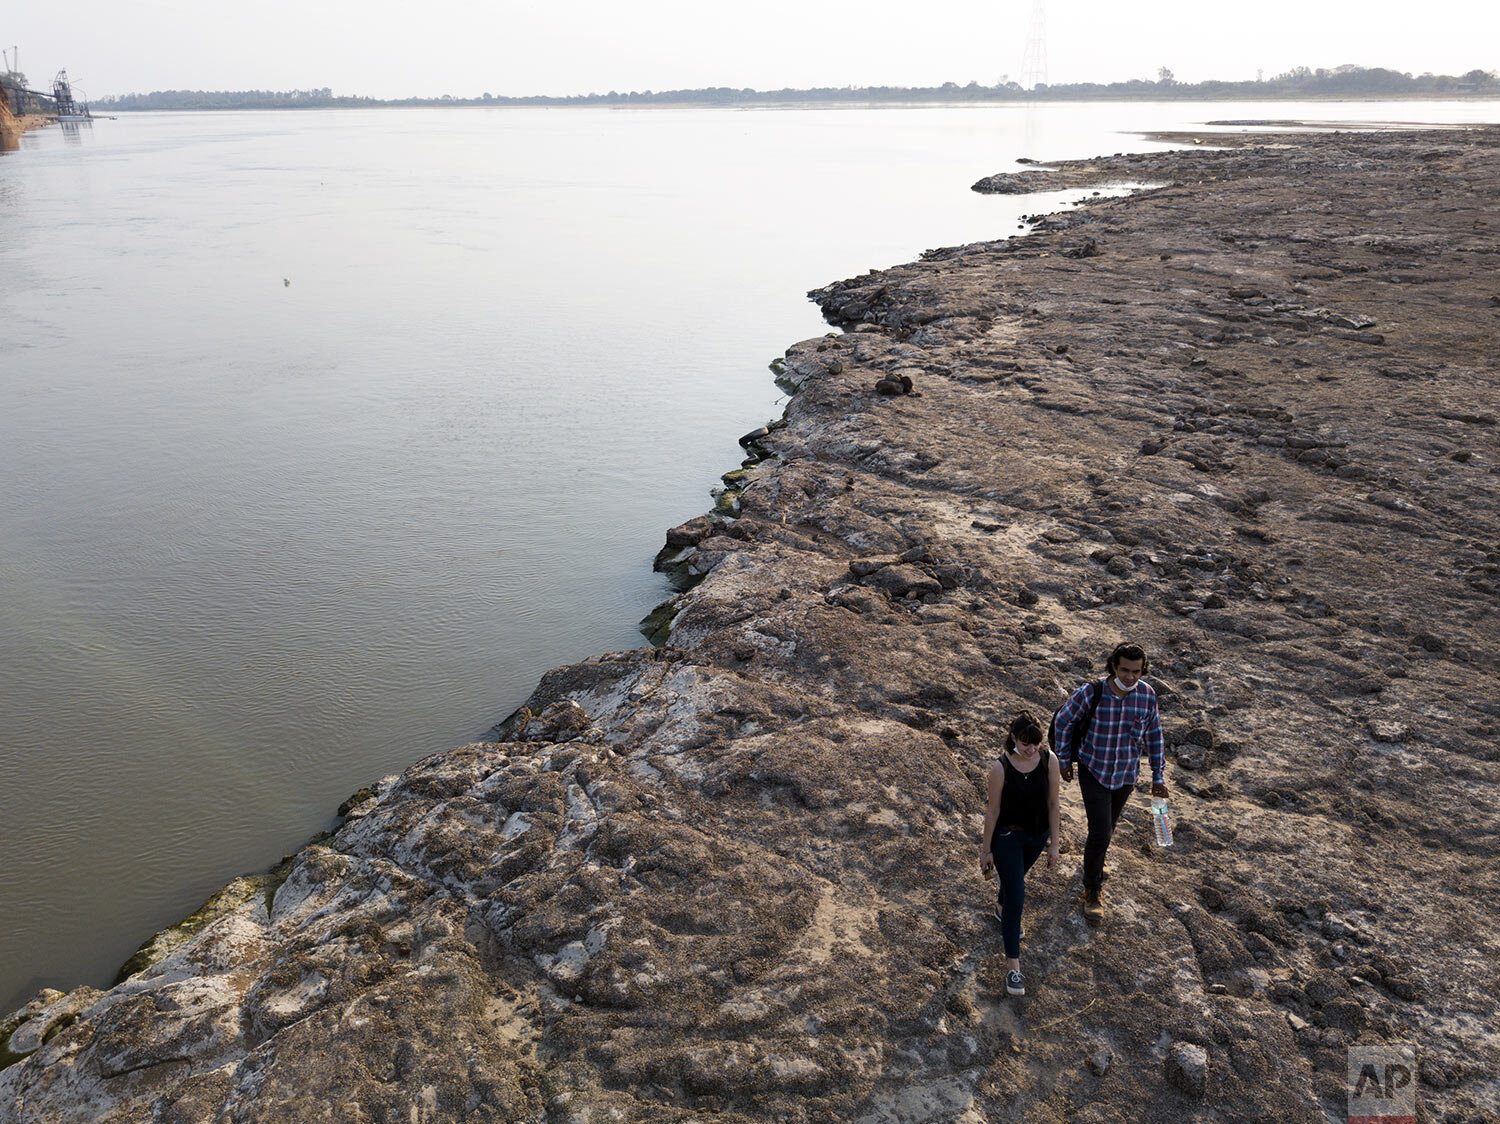  People walk on the remnants of an ancient volcano exposed in the middle of the Paraguay River, off Asuncion, Paraguay, Tuesday, Oct. 6, 2020. (AP Photo/Jorge Saenz) 